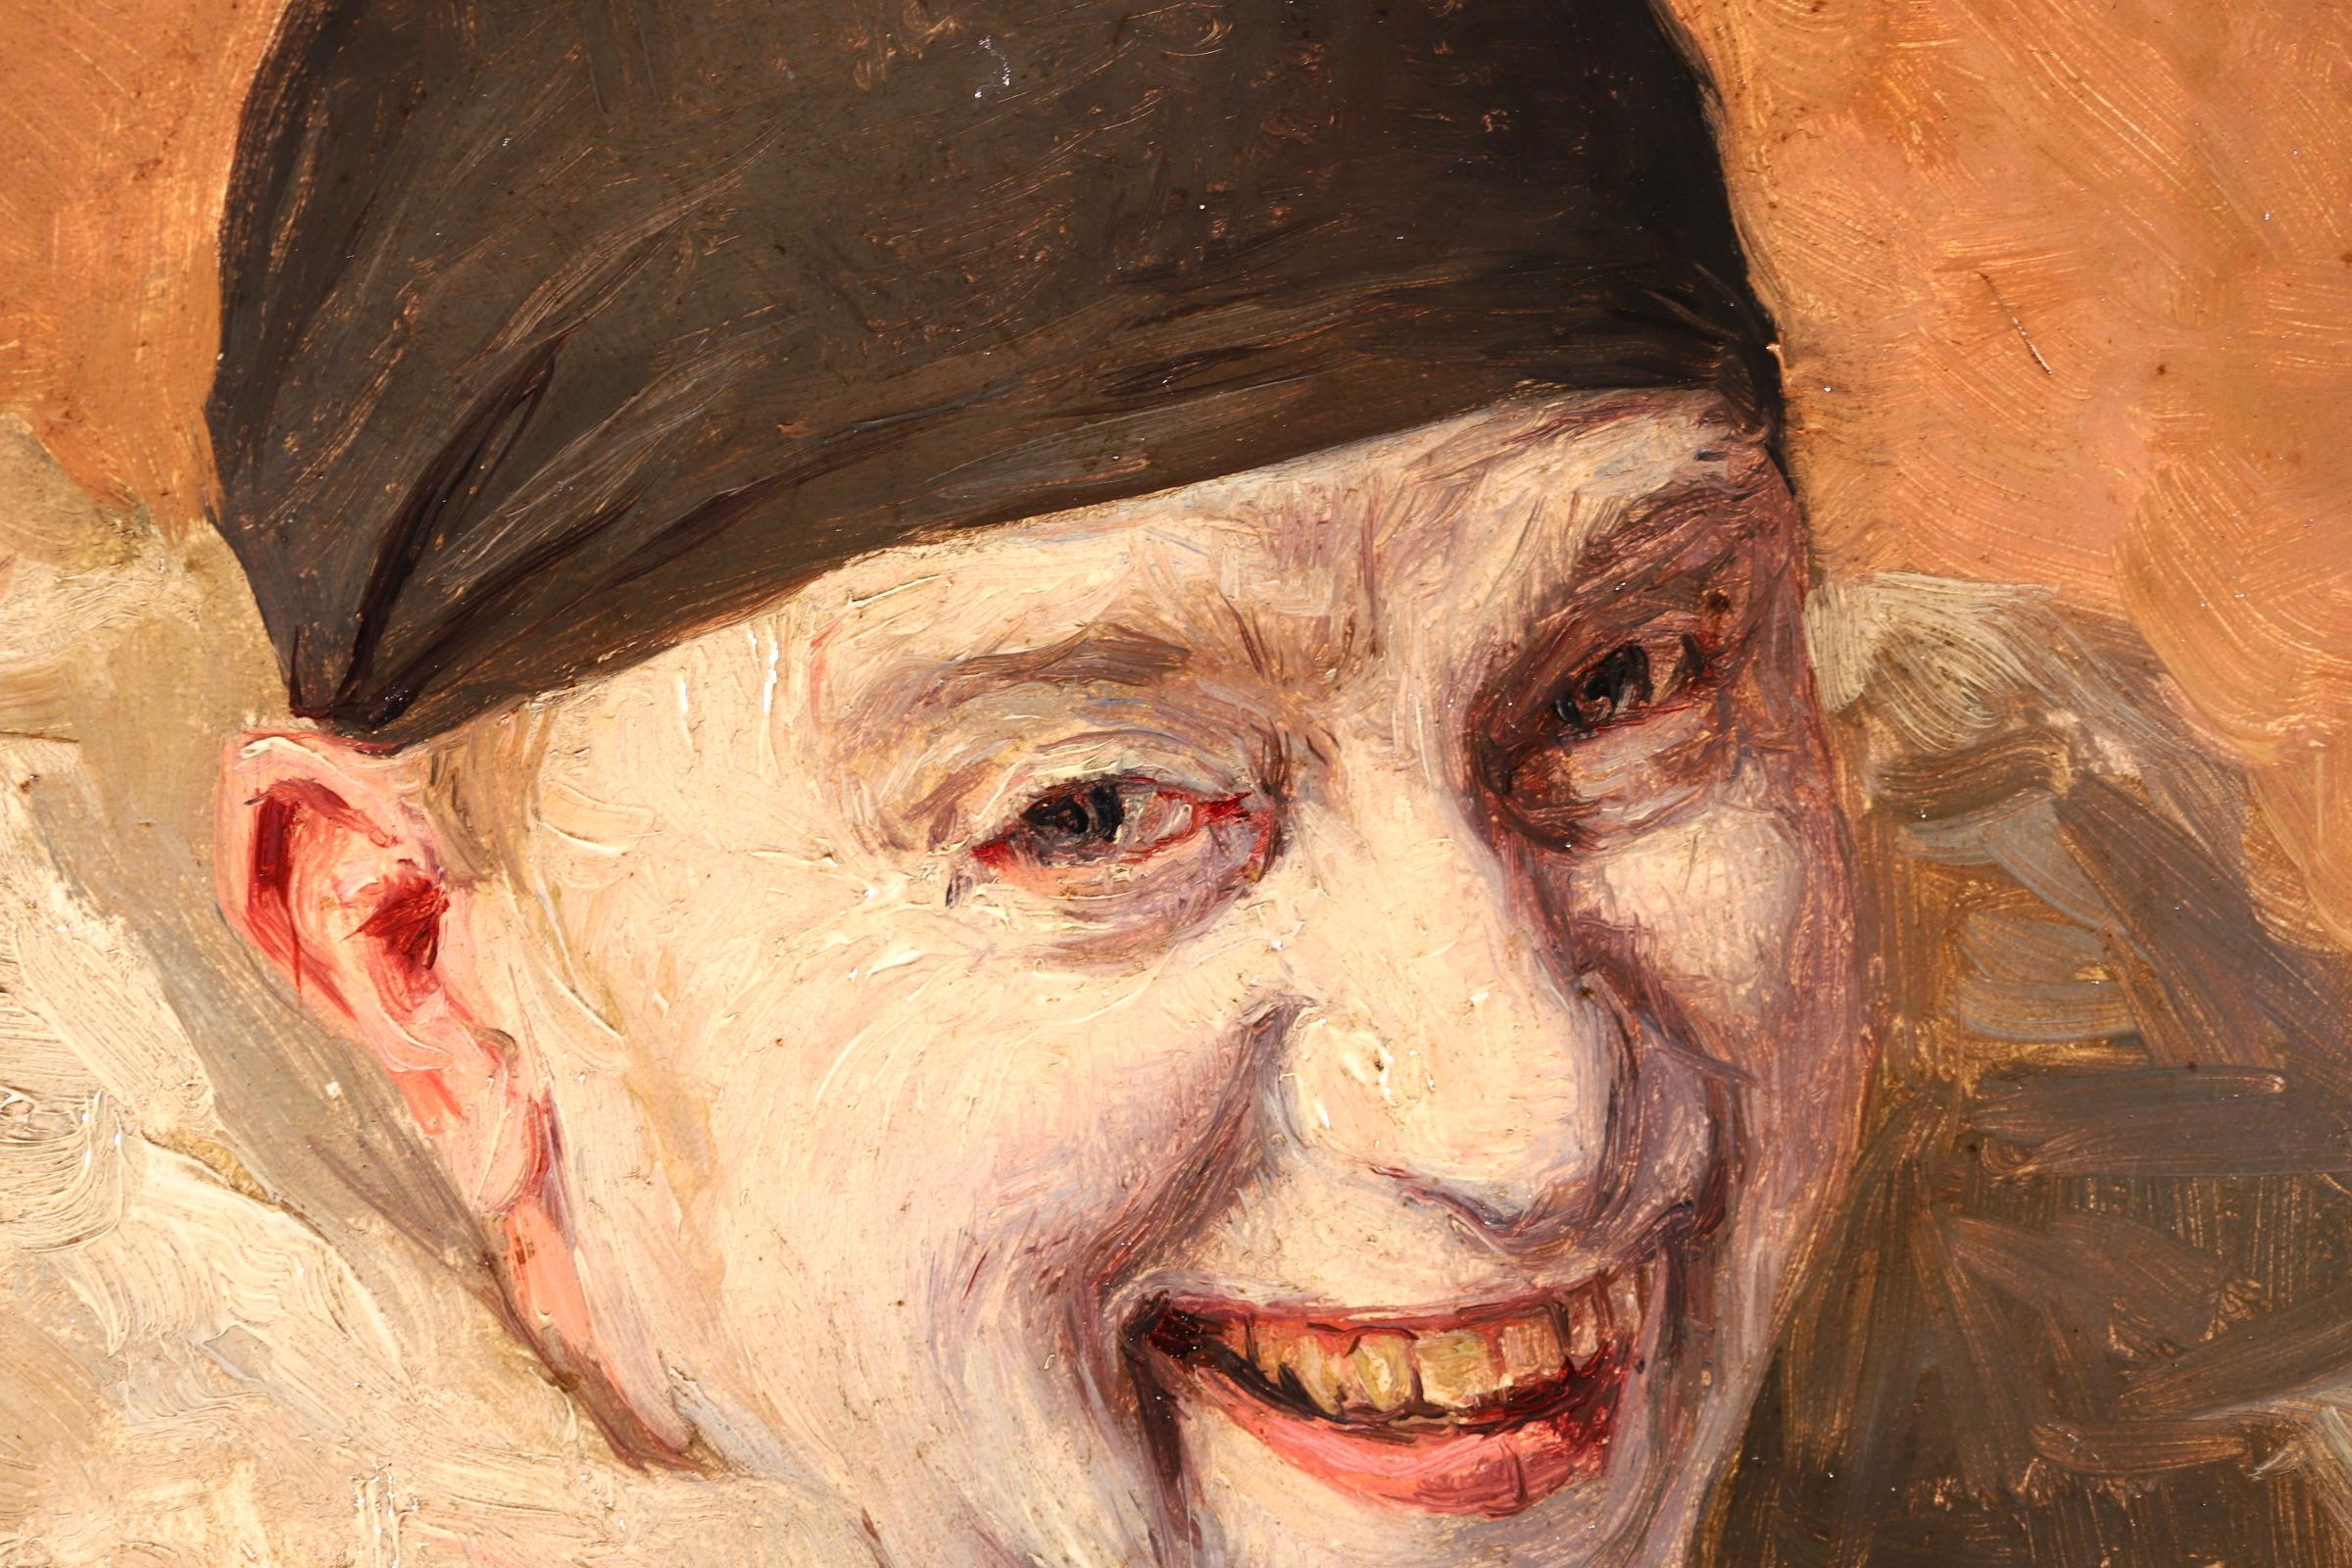 A charming oil on panel circa 1900 by French impressionist painter Armand Francois Henrion depicting a portrait of a happy Pierrot - a French clown - wearing white ruffles and a black hat. The portrait is contrasted by an orange-red